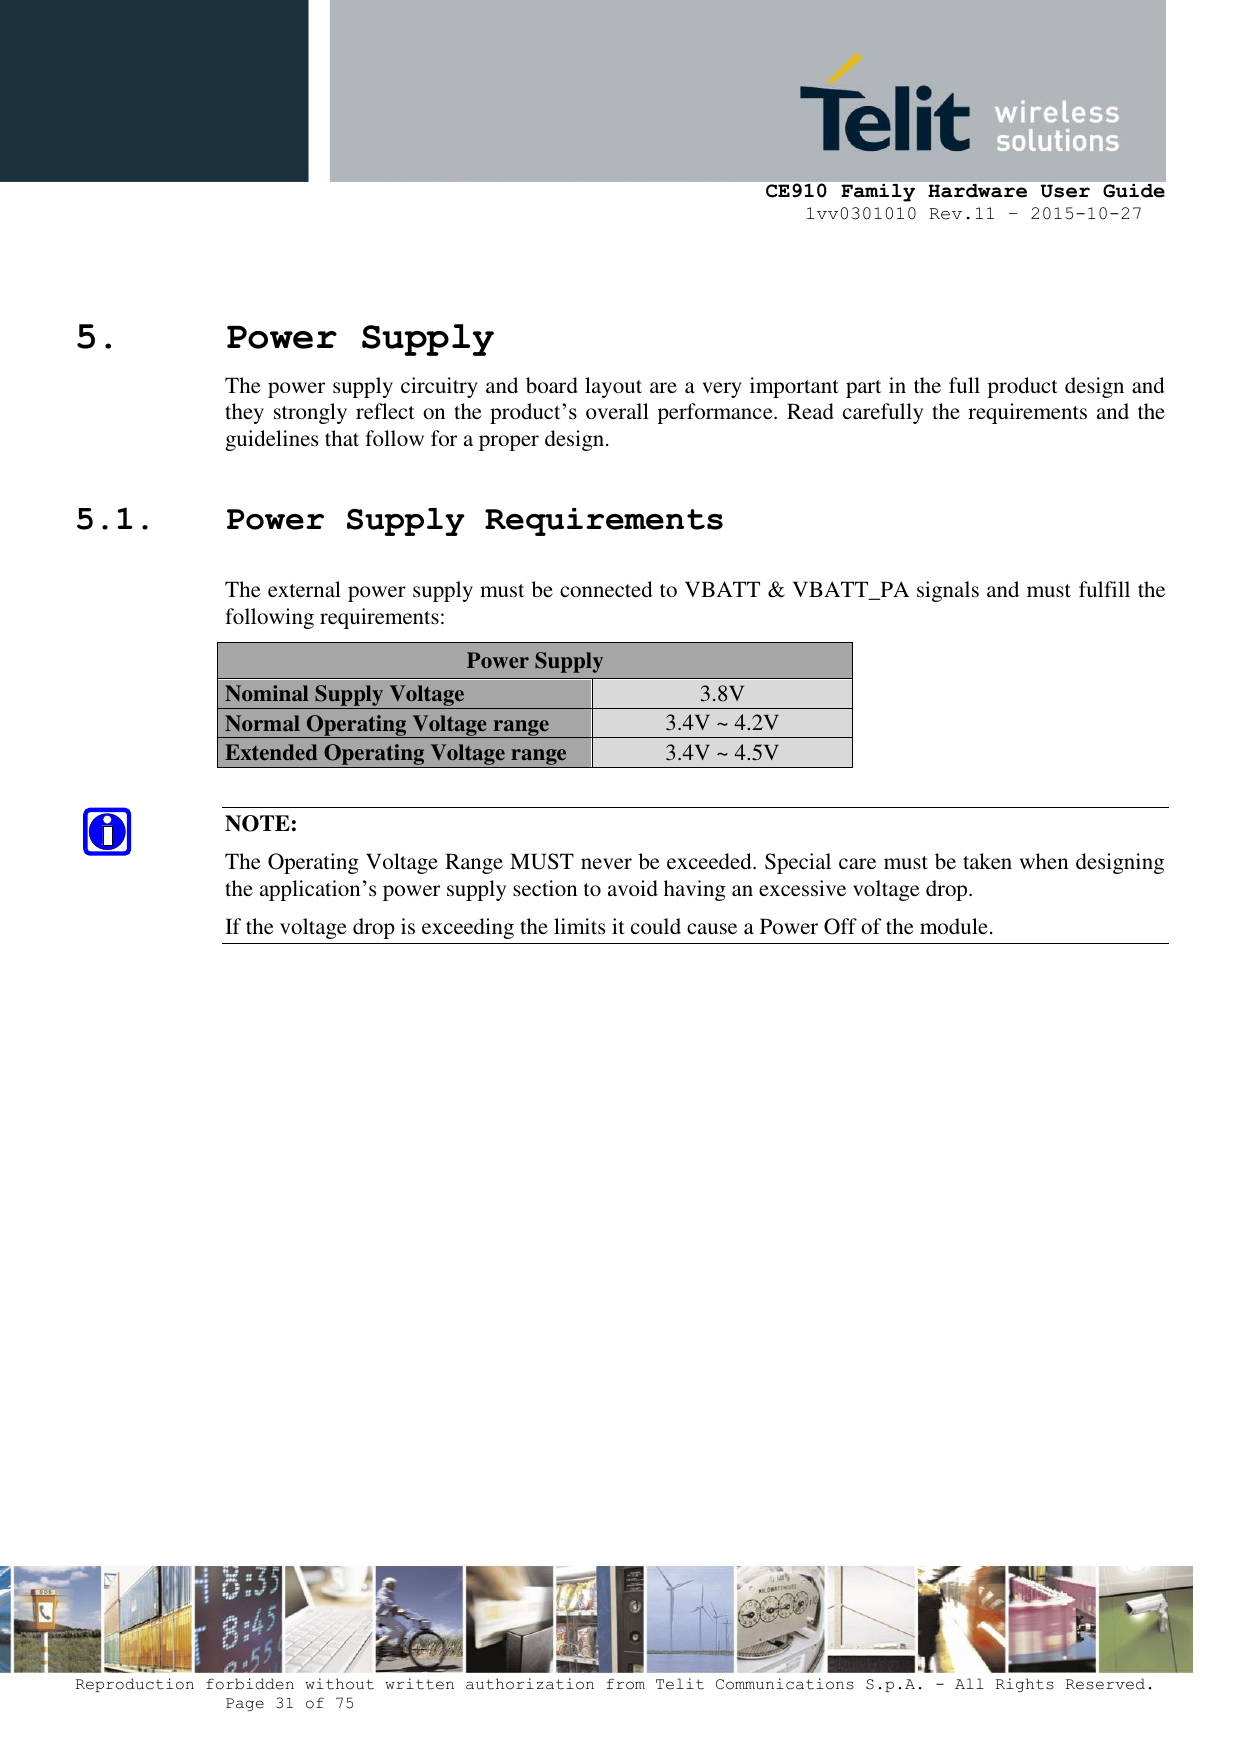     CE910 Family Hardware User Guide 1vv0301010 Rev.11 – 2015-10-27 Reproduction forbidden without written authorization from Telit Communications S.p.A. - All Rights Reserved.    Page 31 of 75                                                     5. Power Supply The power supply circuitry and board layout are a very important part in the full product design and they strongly reflect on the product’s overall performance. Read carefully the requirements and the guidelines that follow for a proper design. 5.1. Power Supply Requirements The external power supply must be connected to VBATT &amp; VBATT_PA signals and must fulfill the following requirements: Power Supply Nominal Supply Voltage 3.8V Normal Operating Voltage range 3.4V ~ 4.2V Extended Operating Voltage range 3.4V ~ 4.5V  NOTE: The Operating Voltage Range MUST never be exceeded. Special care must be taken when designing the application’s power supply section to avoid having an excessive voltage drop. If the voltage drop is exceeding the limits it could cause a Power Off of the module.               